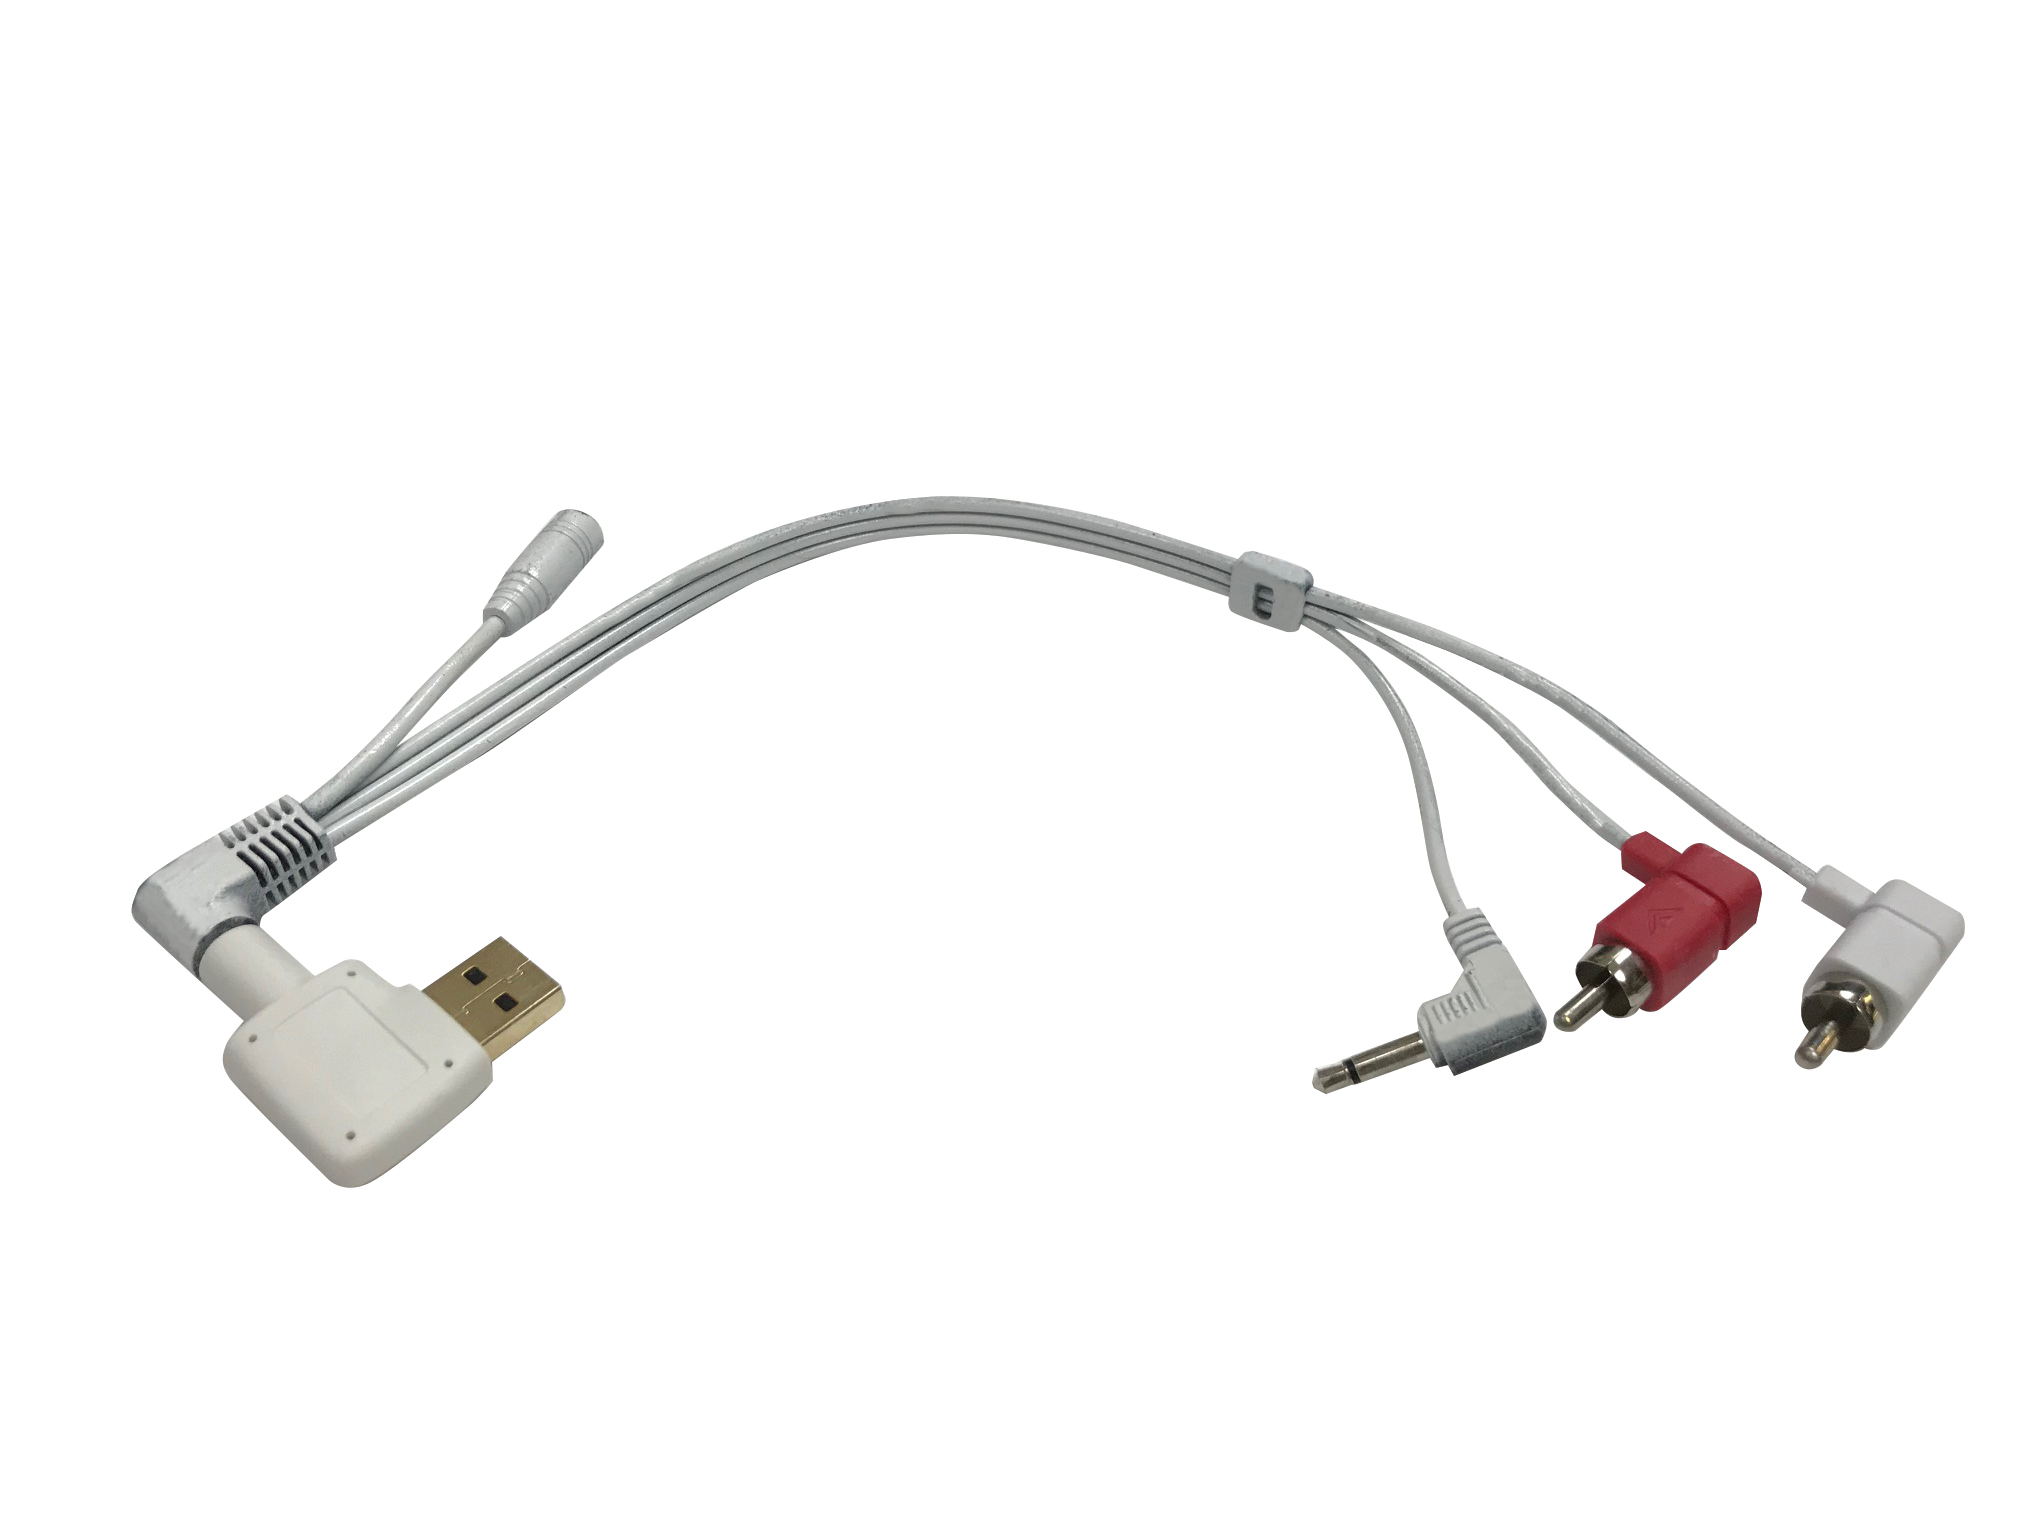 FrontRow Video Conferencing Cable